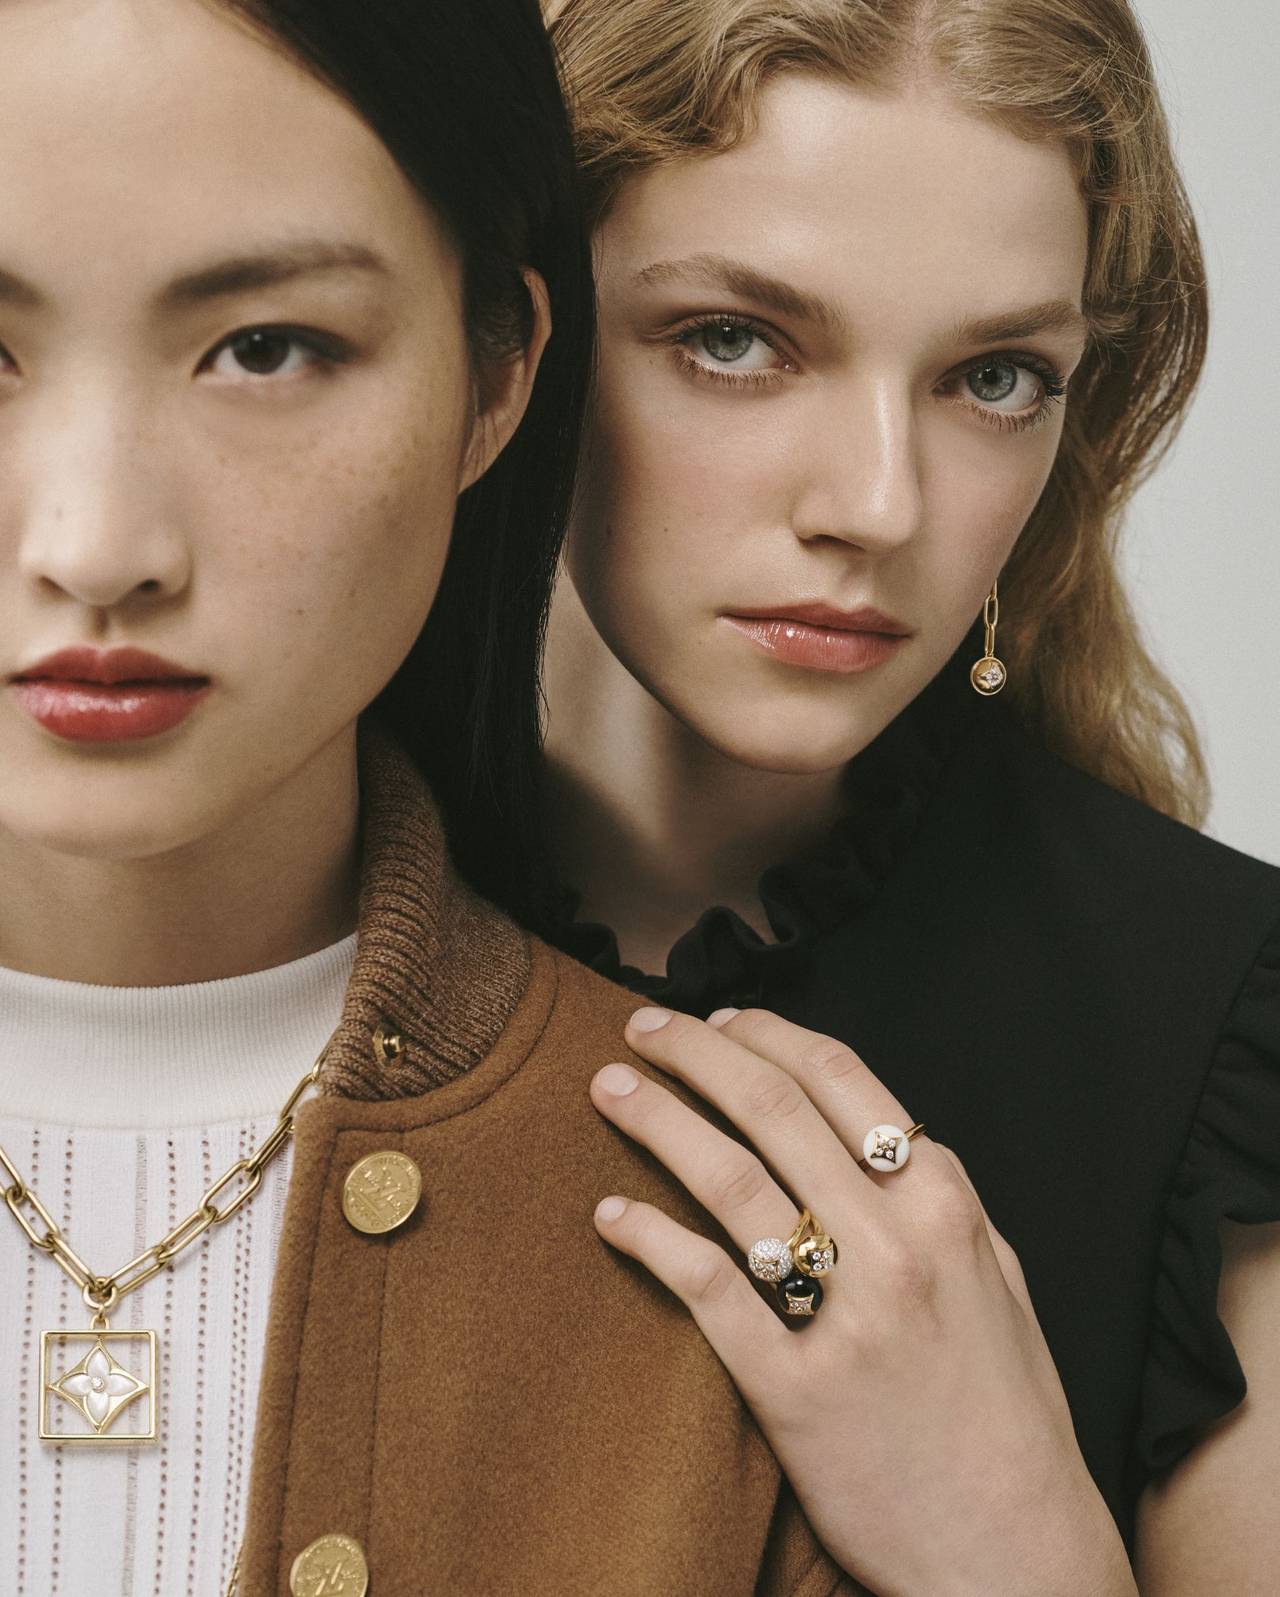 Louis Vuitton Launches B Blossom Jewelry